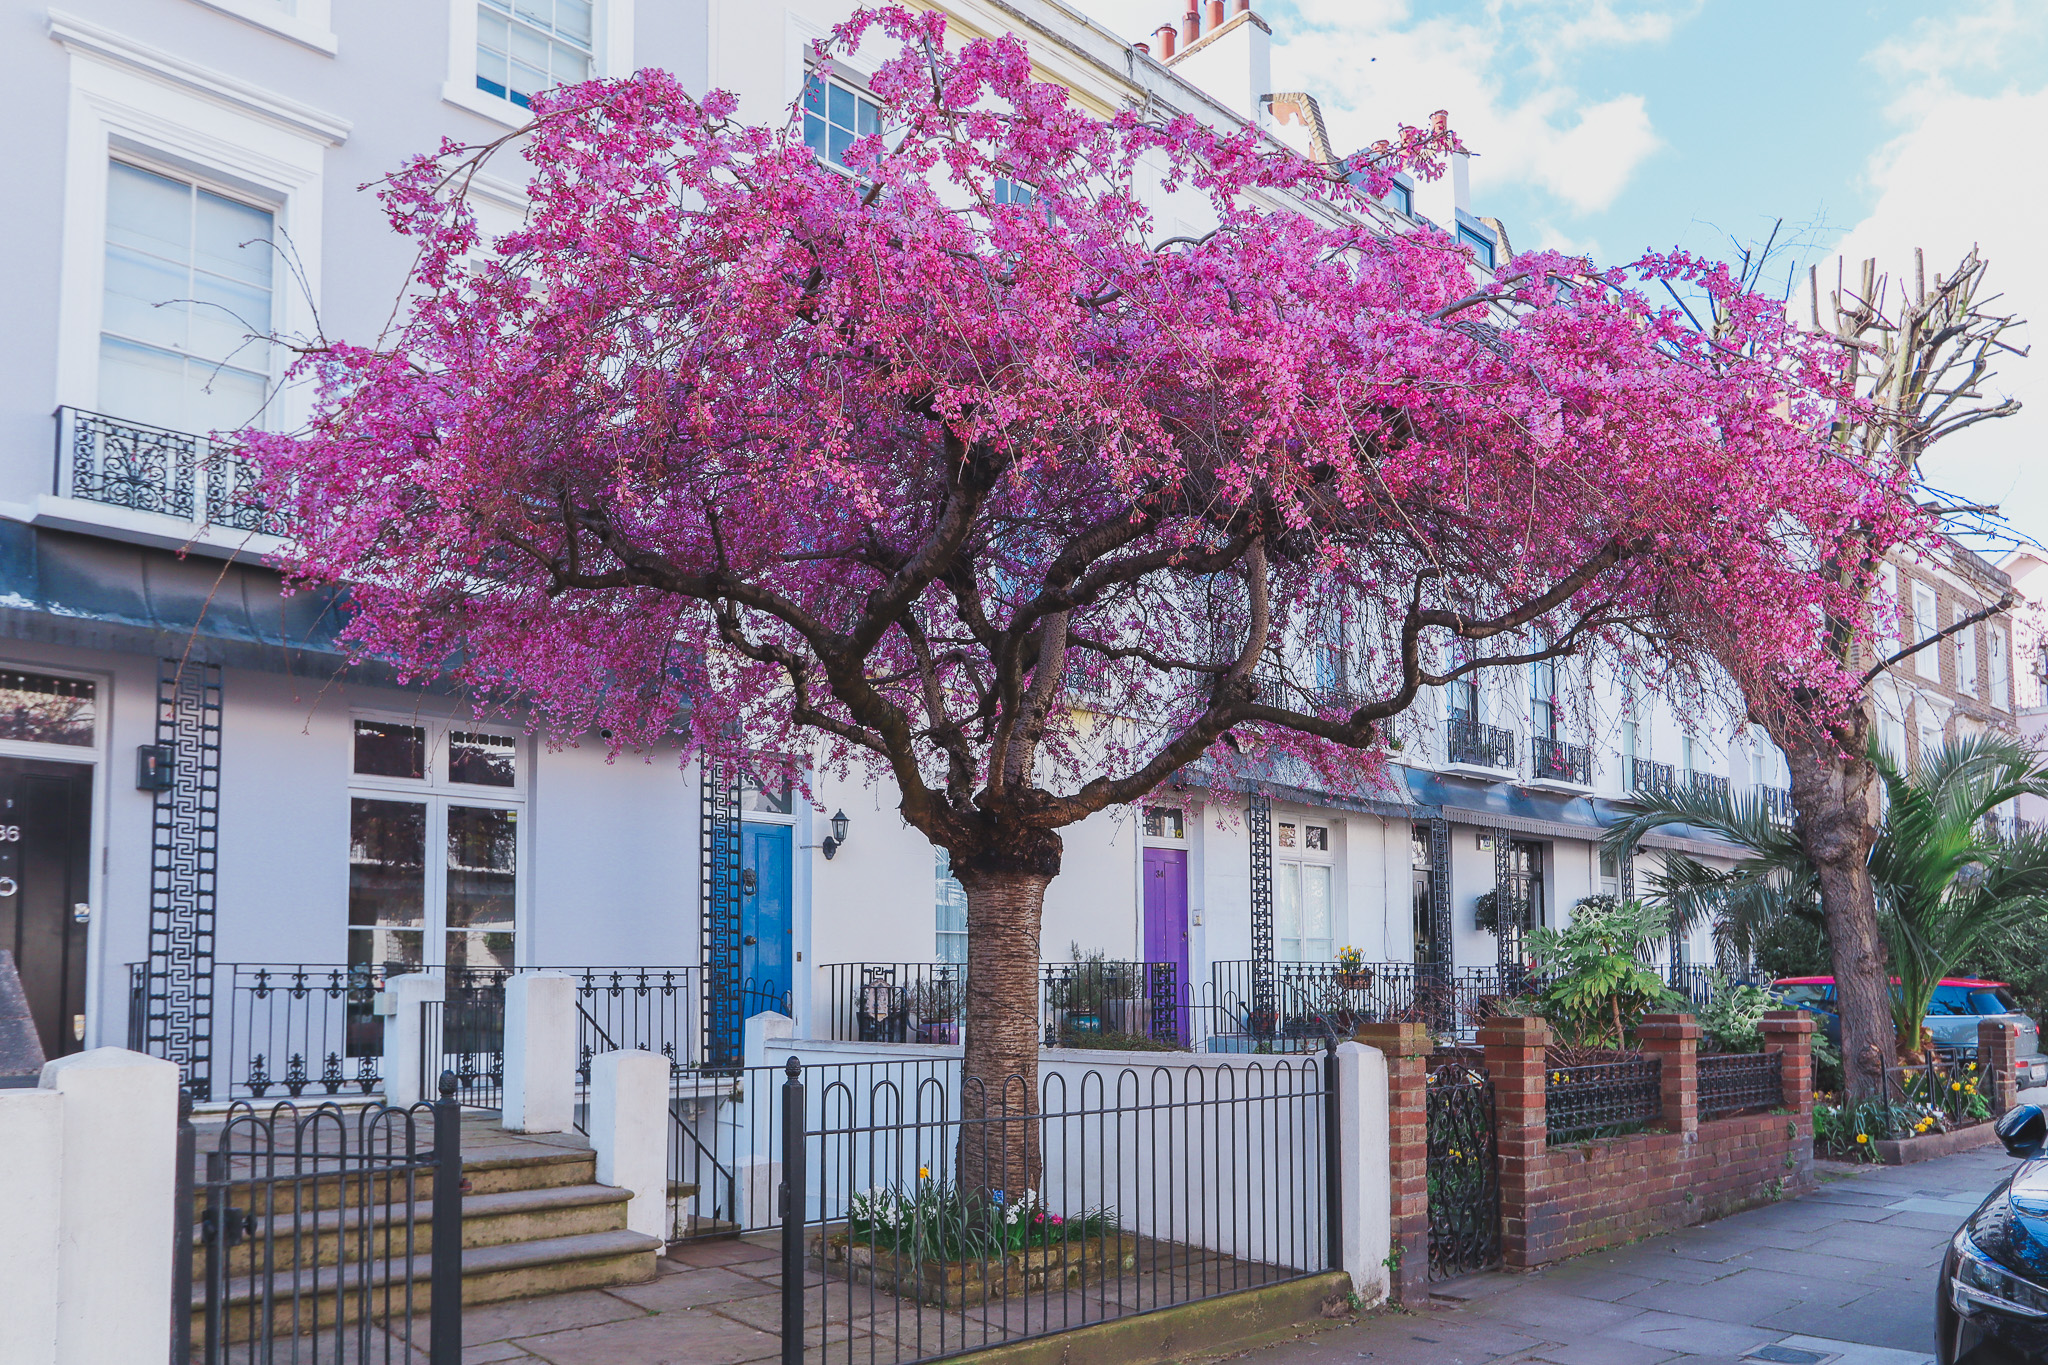 Pink blossoms in Northumberland Place, London